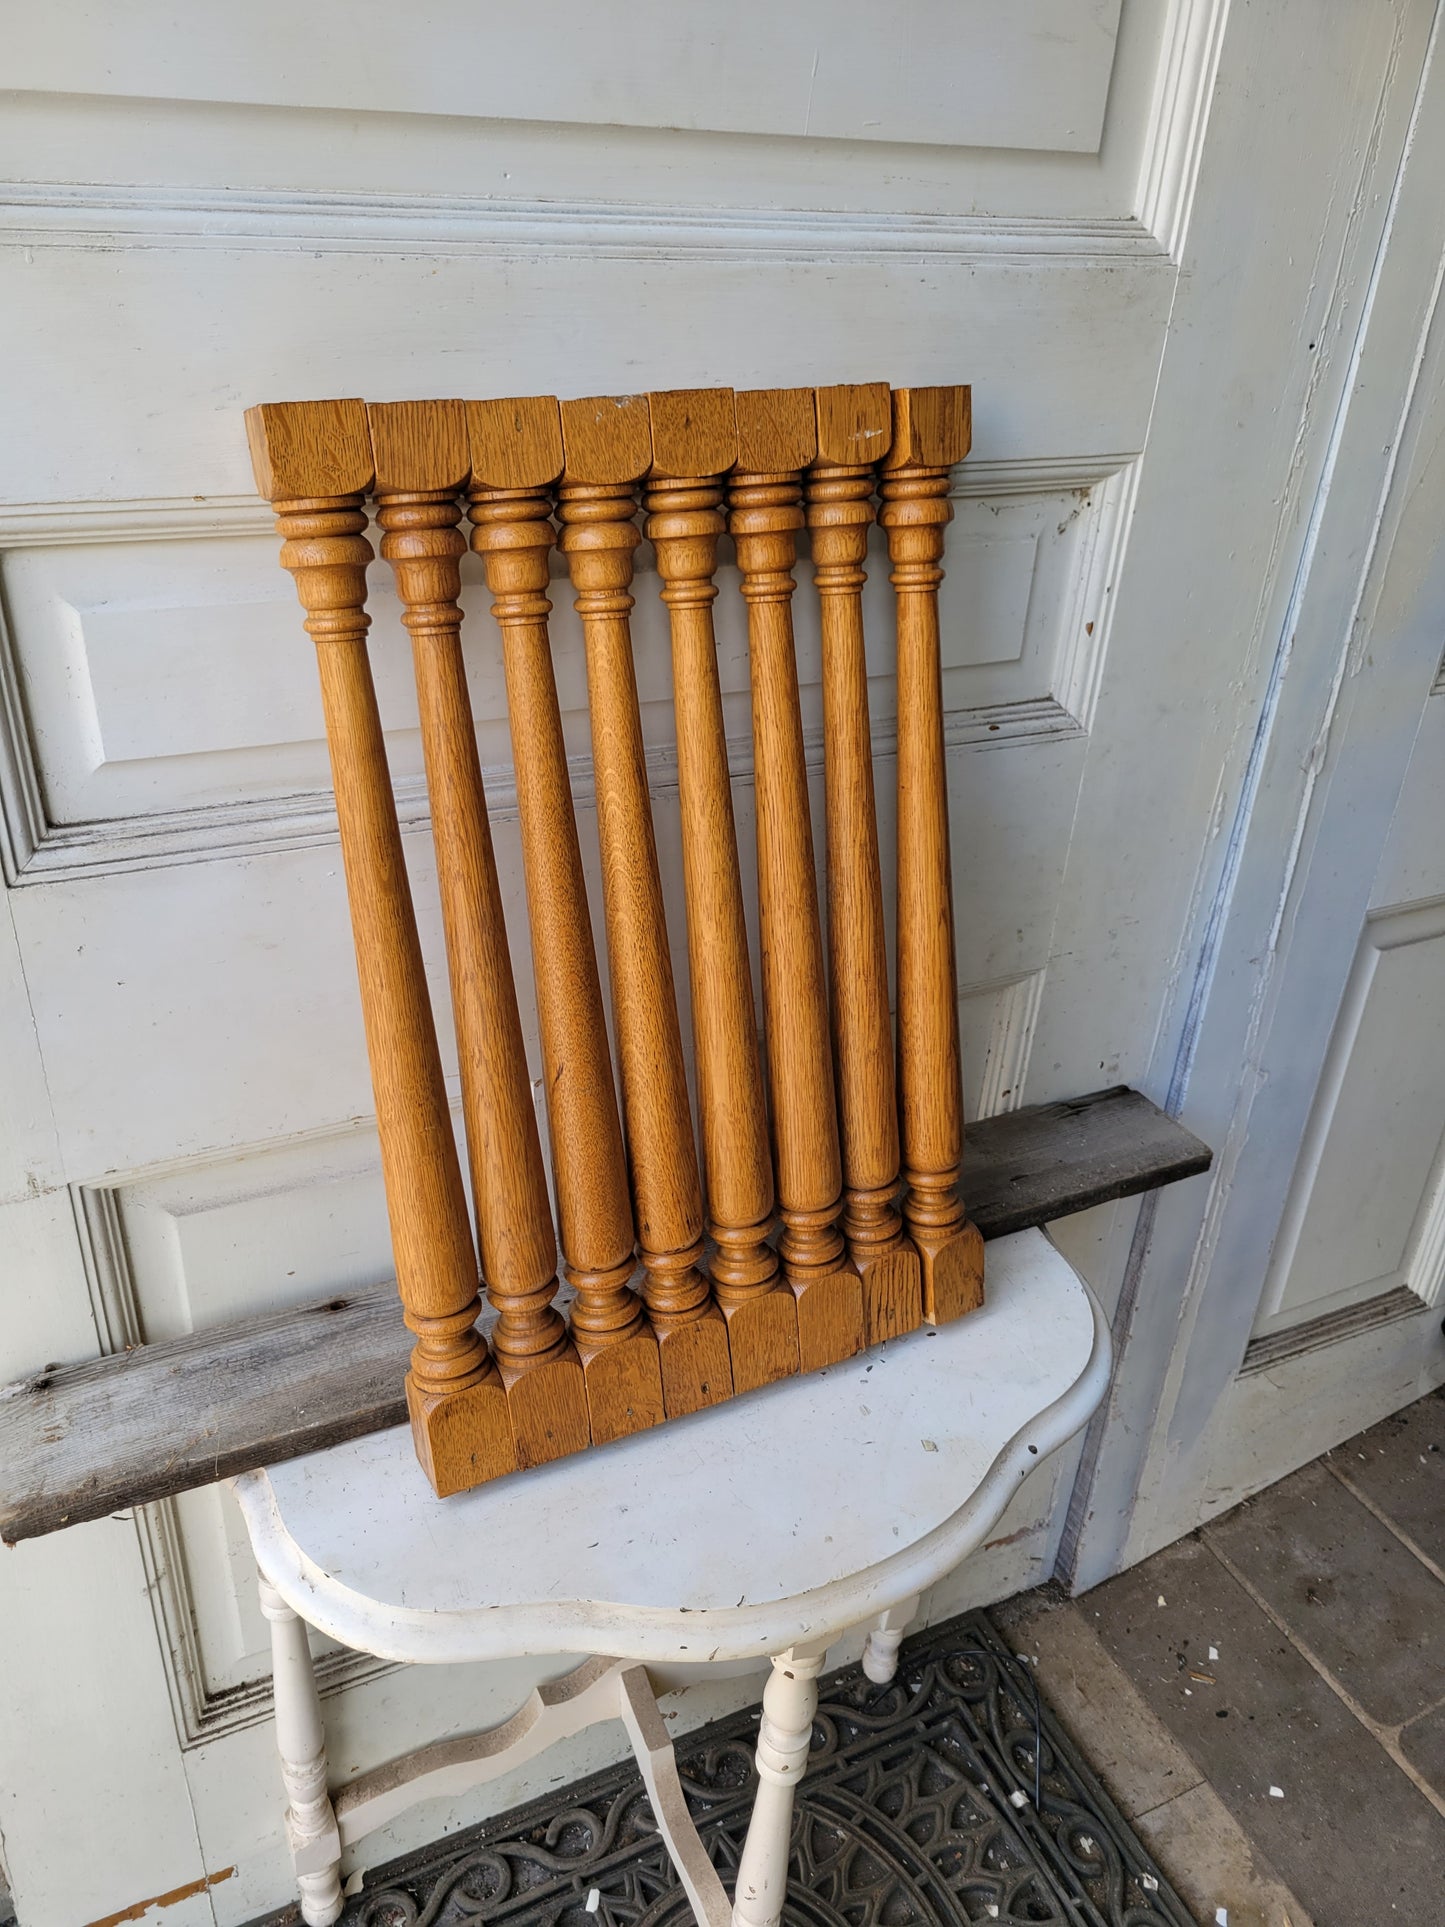 Set of 8 Antique Wood Staircase Spindles, 8 Matching Stair Balusters